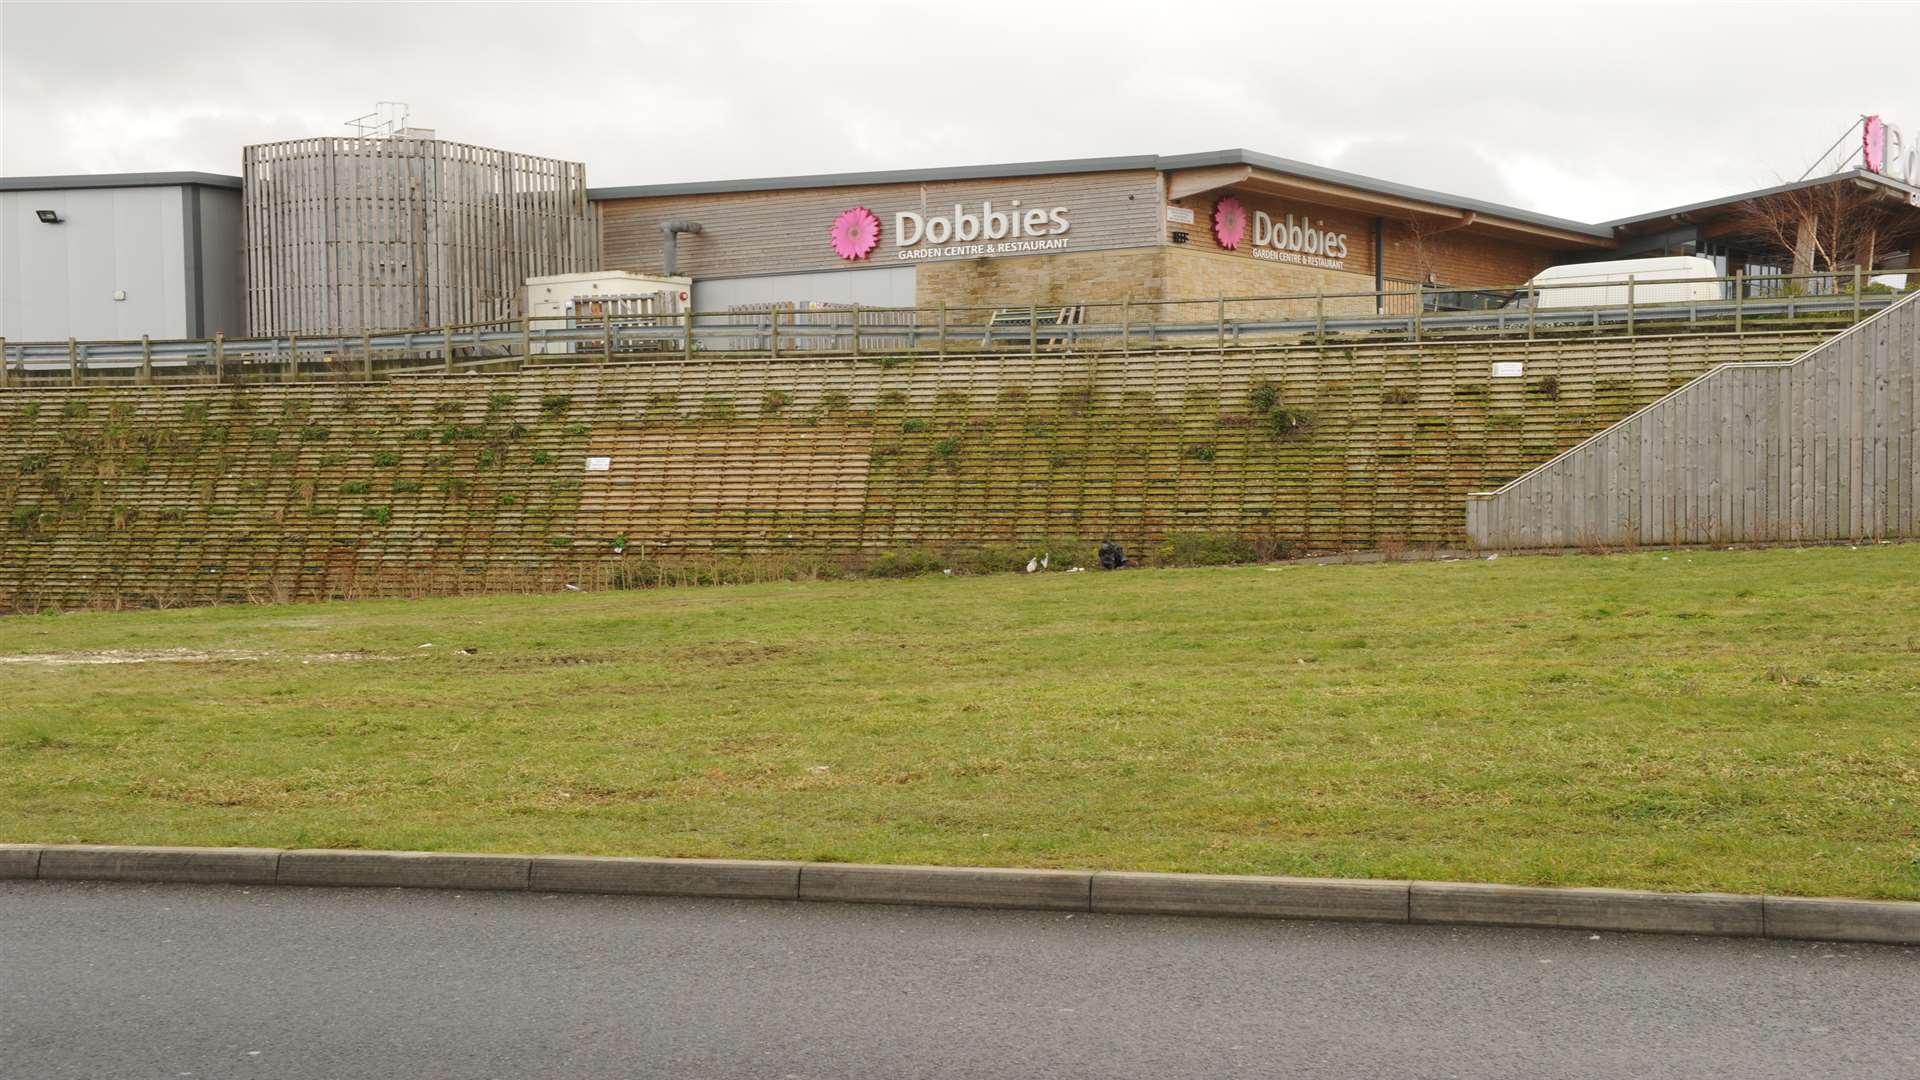 Land between Dobbies and Tesco, Courtney Road, Gillingham